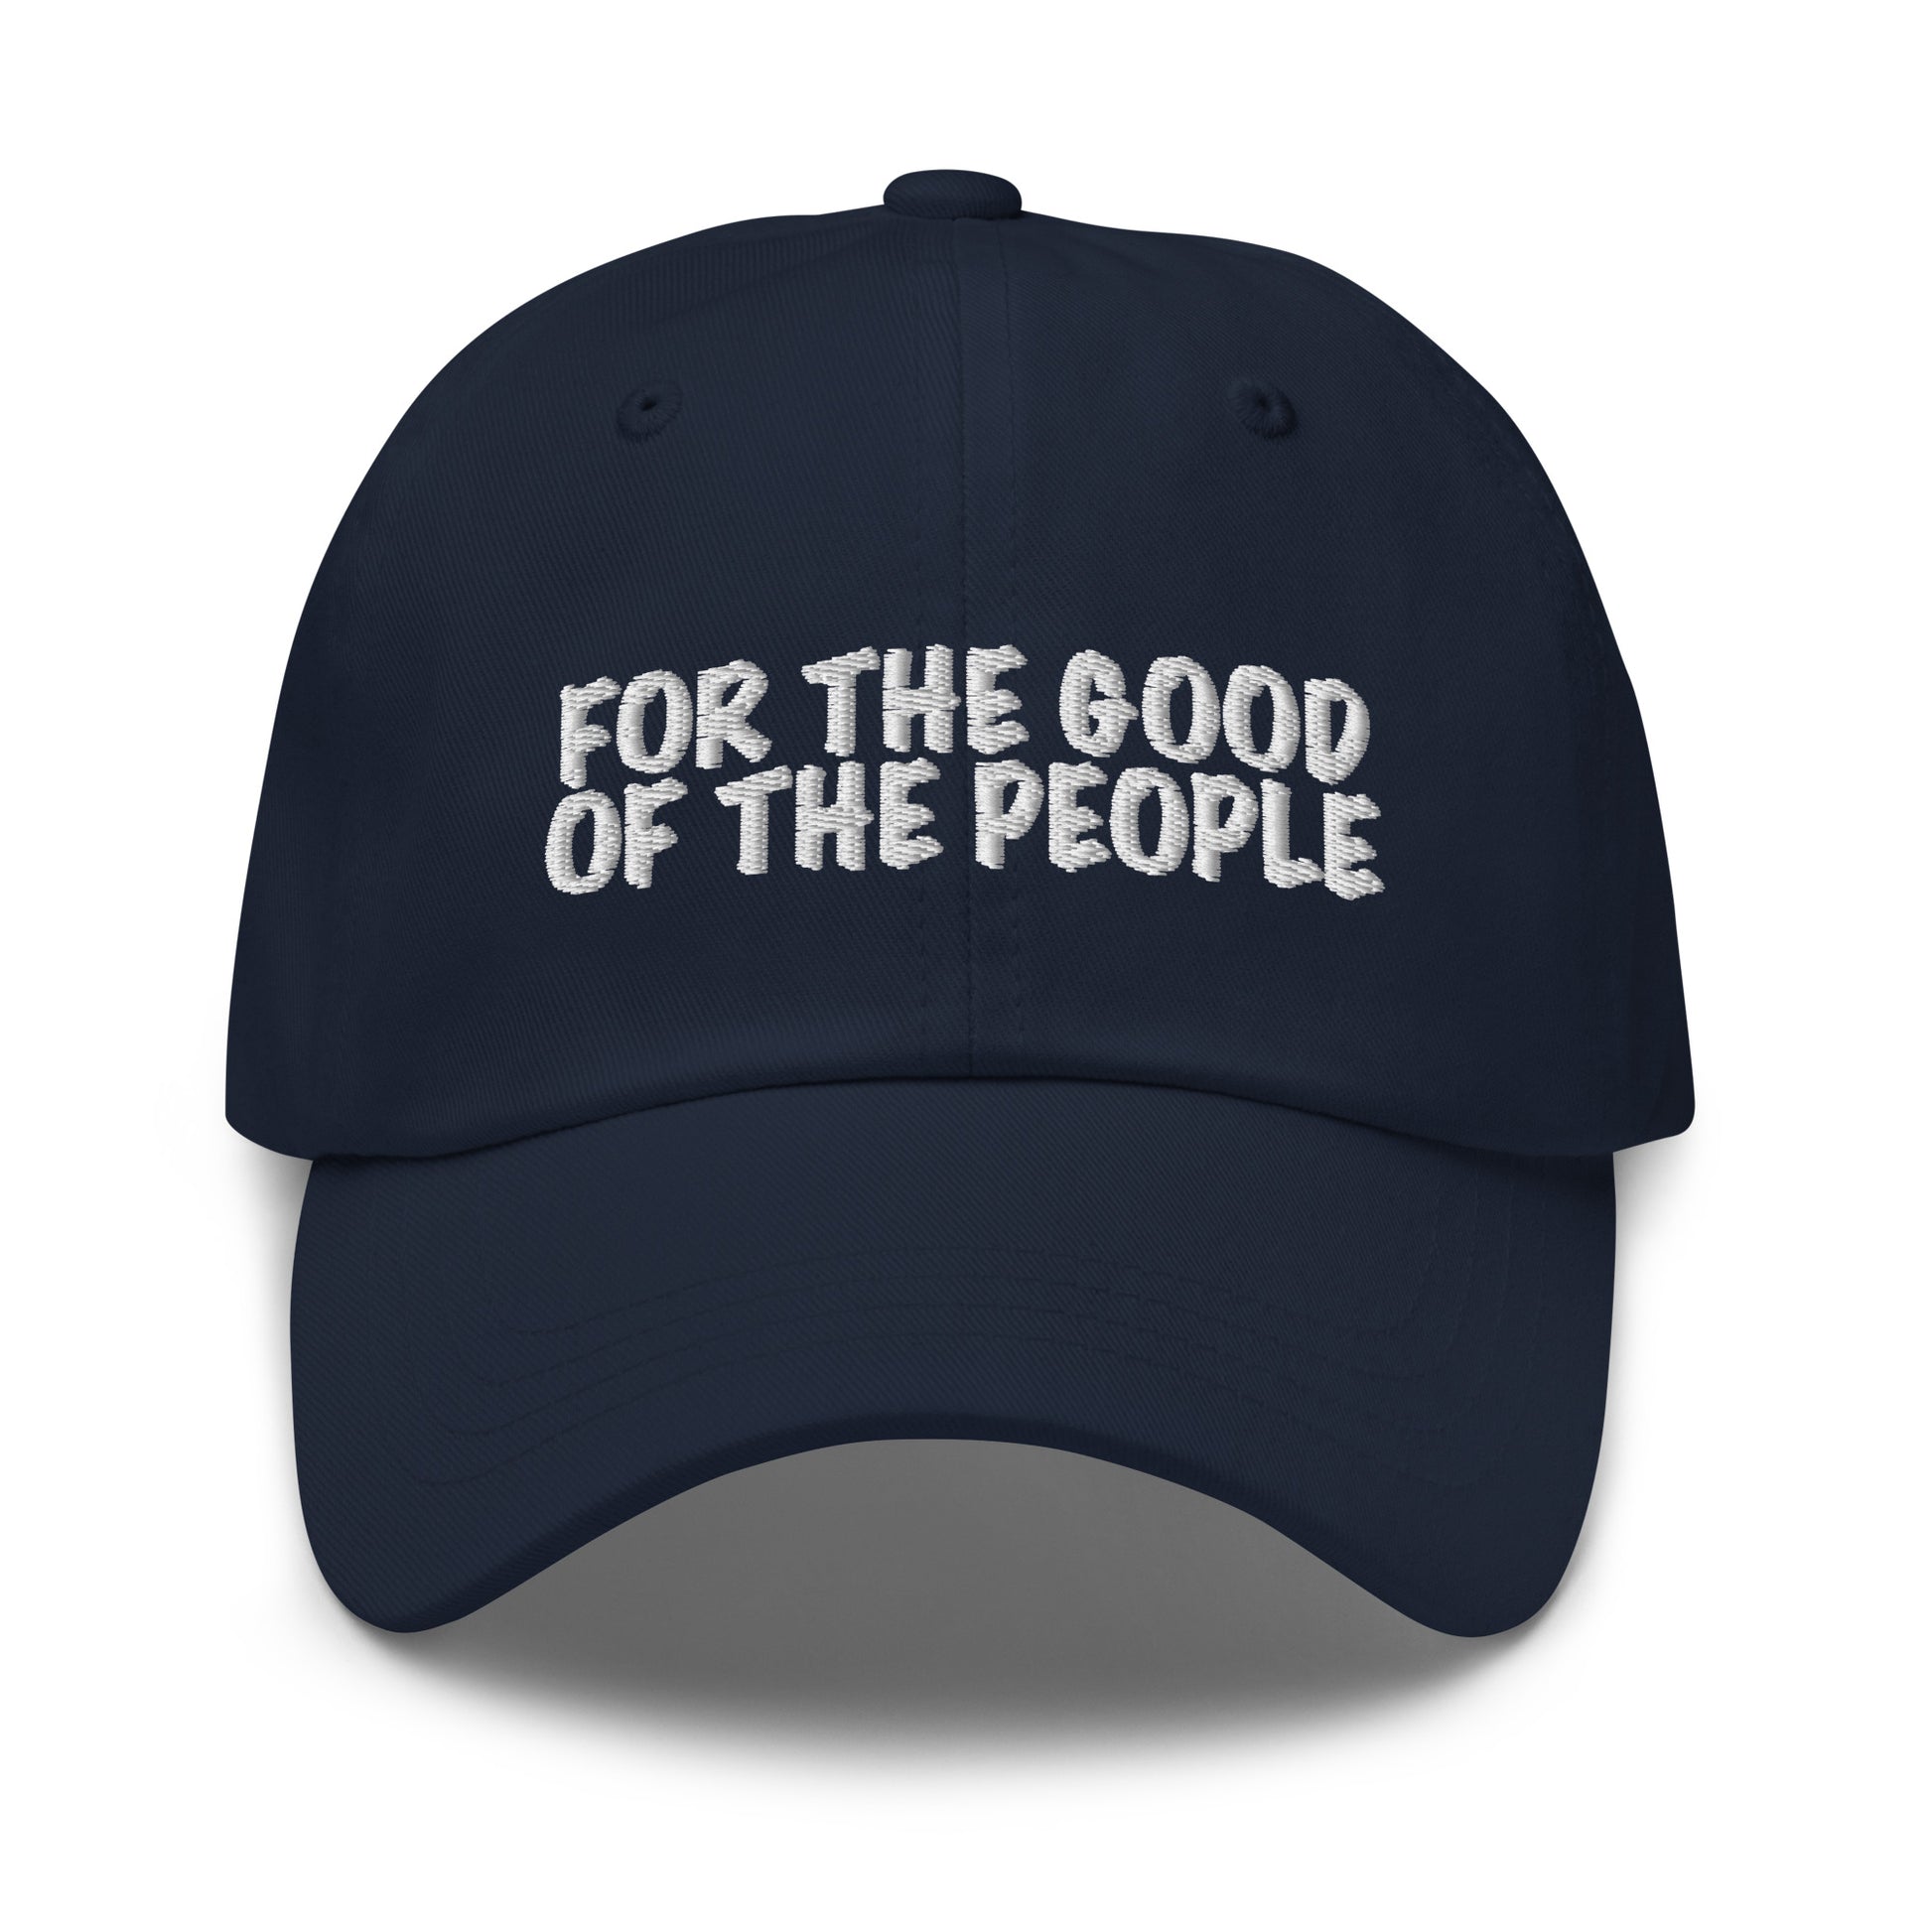 For the good of the people embroidered in white on front of navy dad hat.